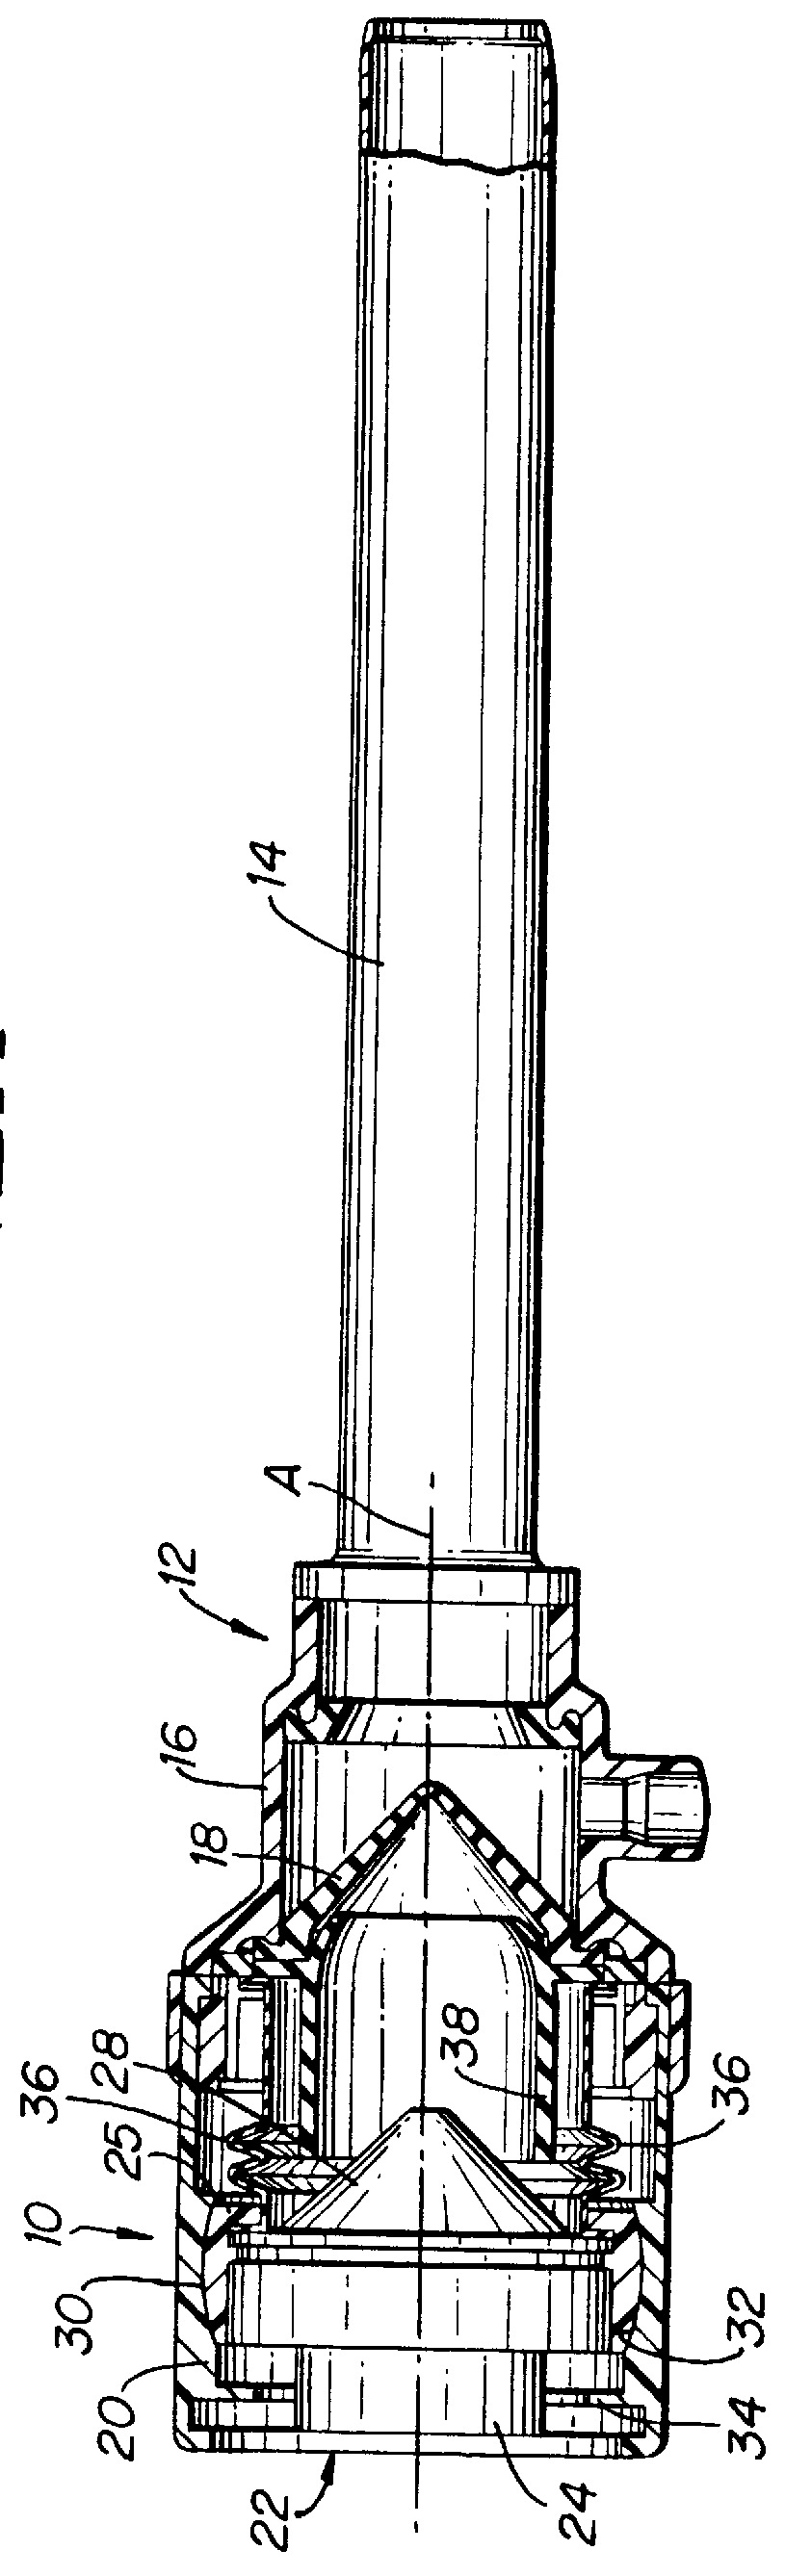 Seal assembly for accommodating introduction of surgical instruments